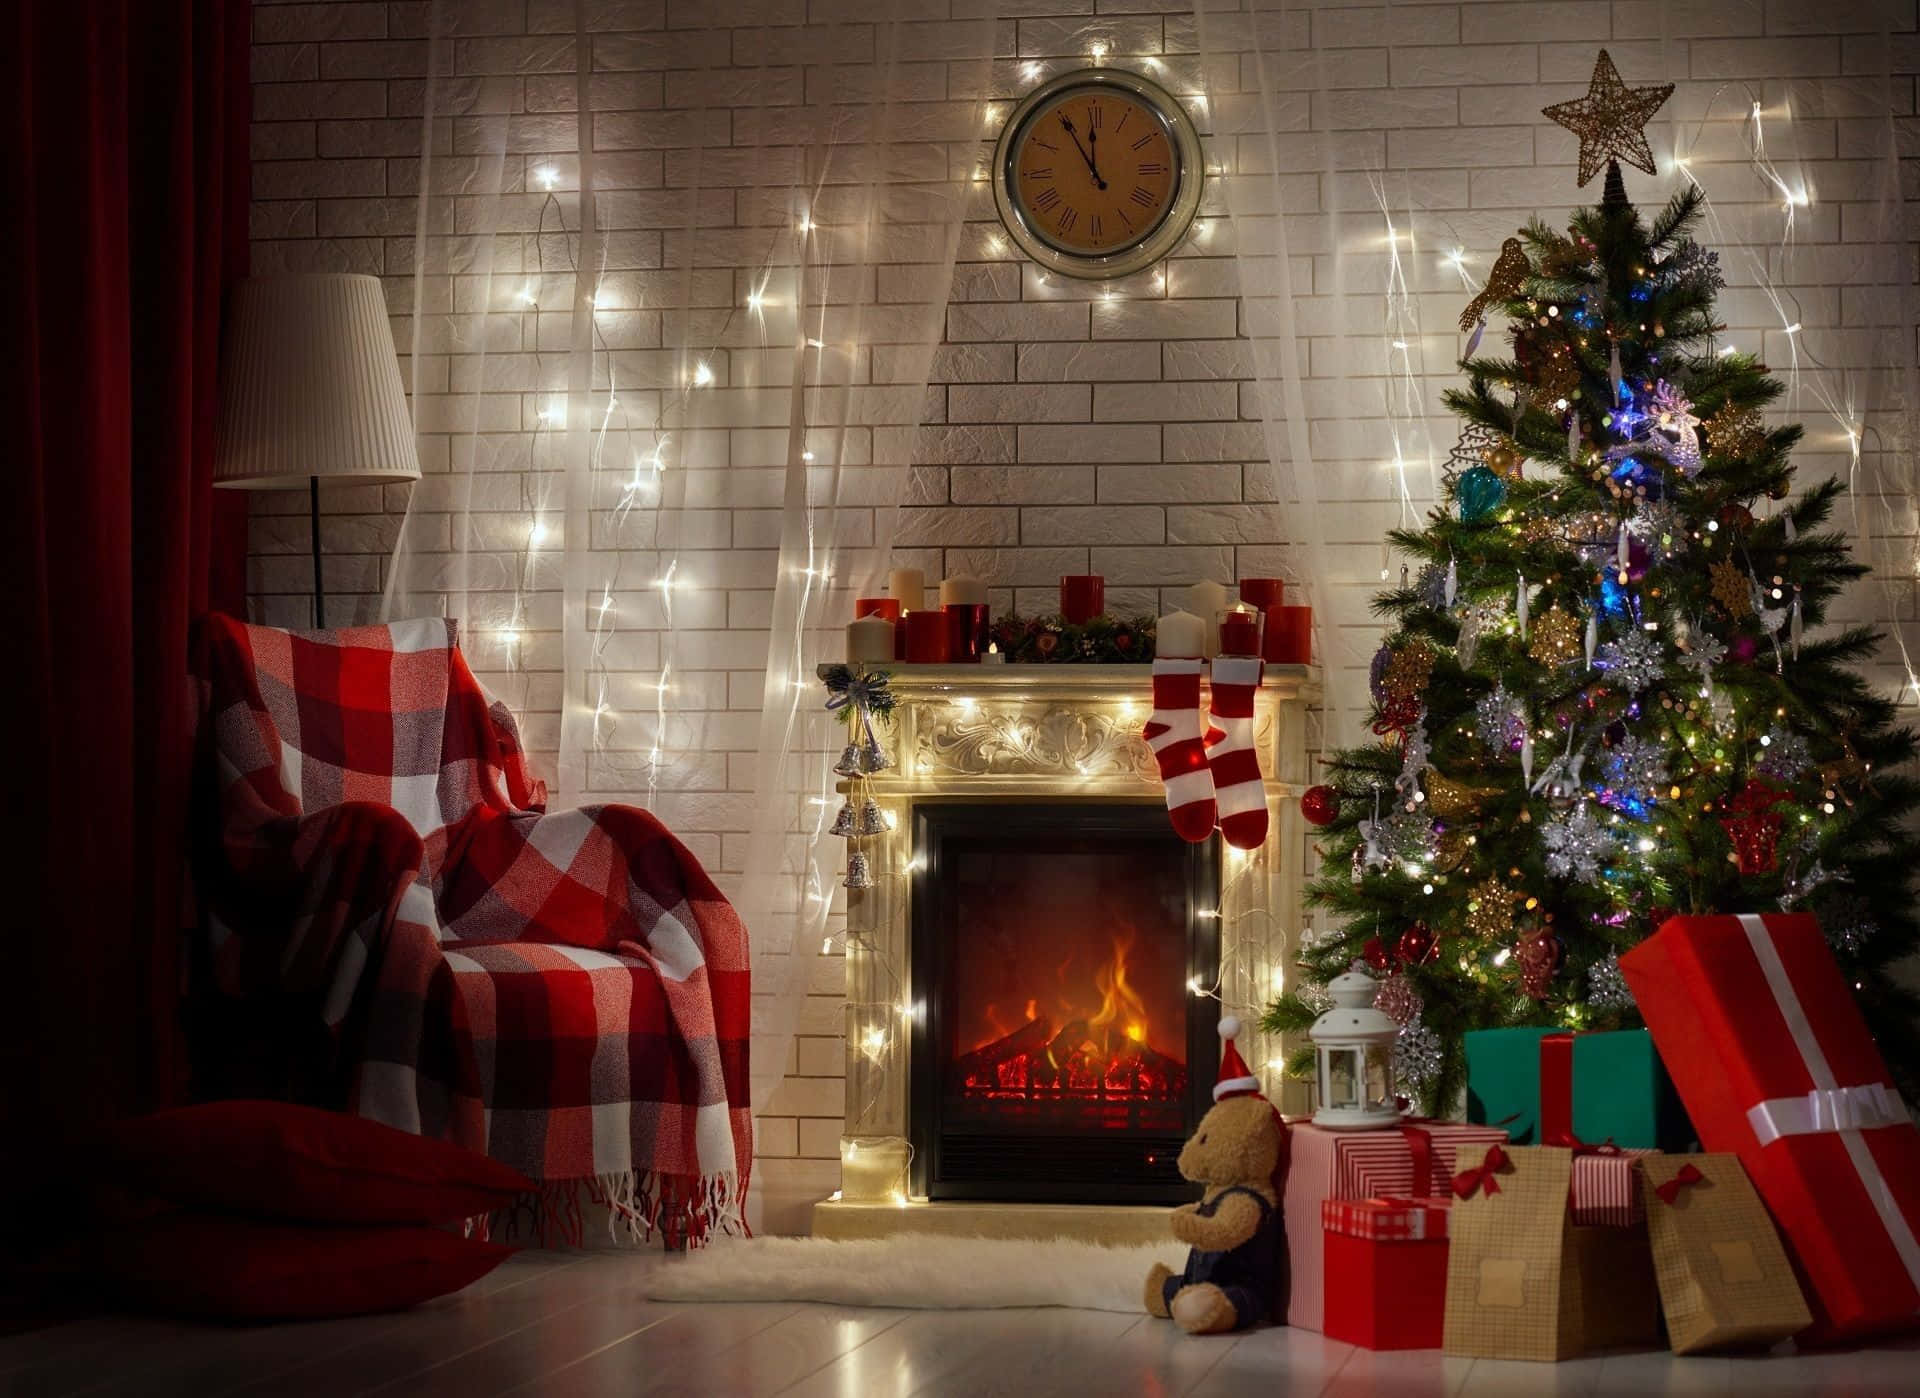 Christmas Fireplace With Tree And Plaid Couch Background